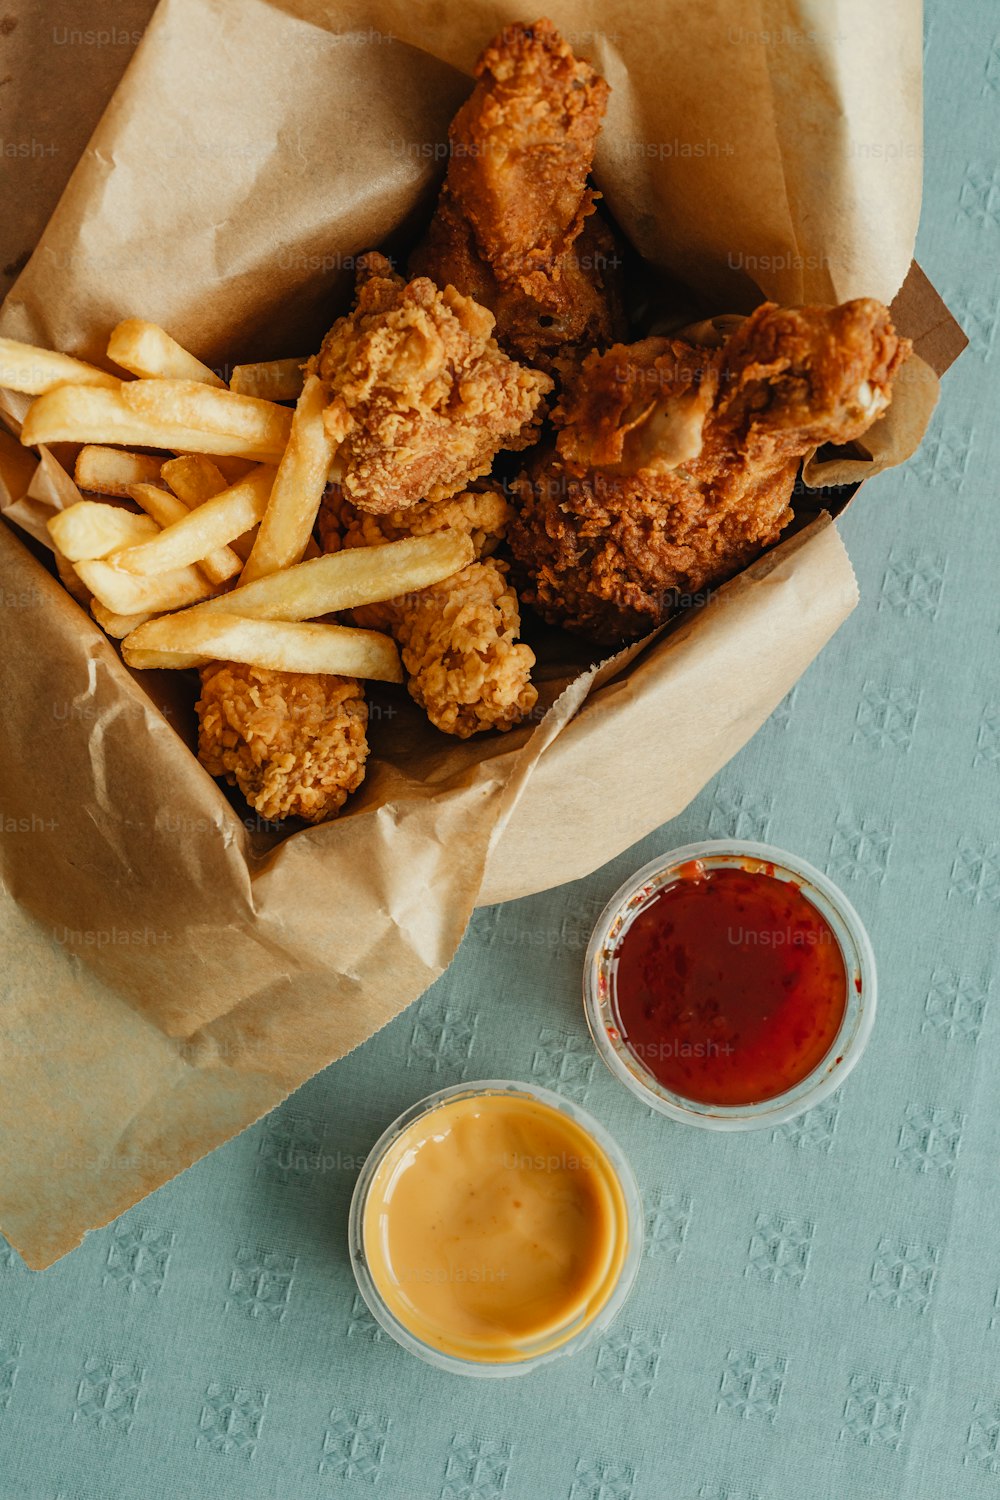 a basket filled with fried chicken and fries next to ketchup